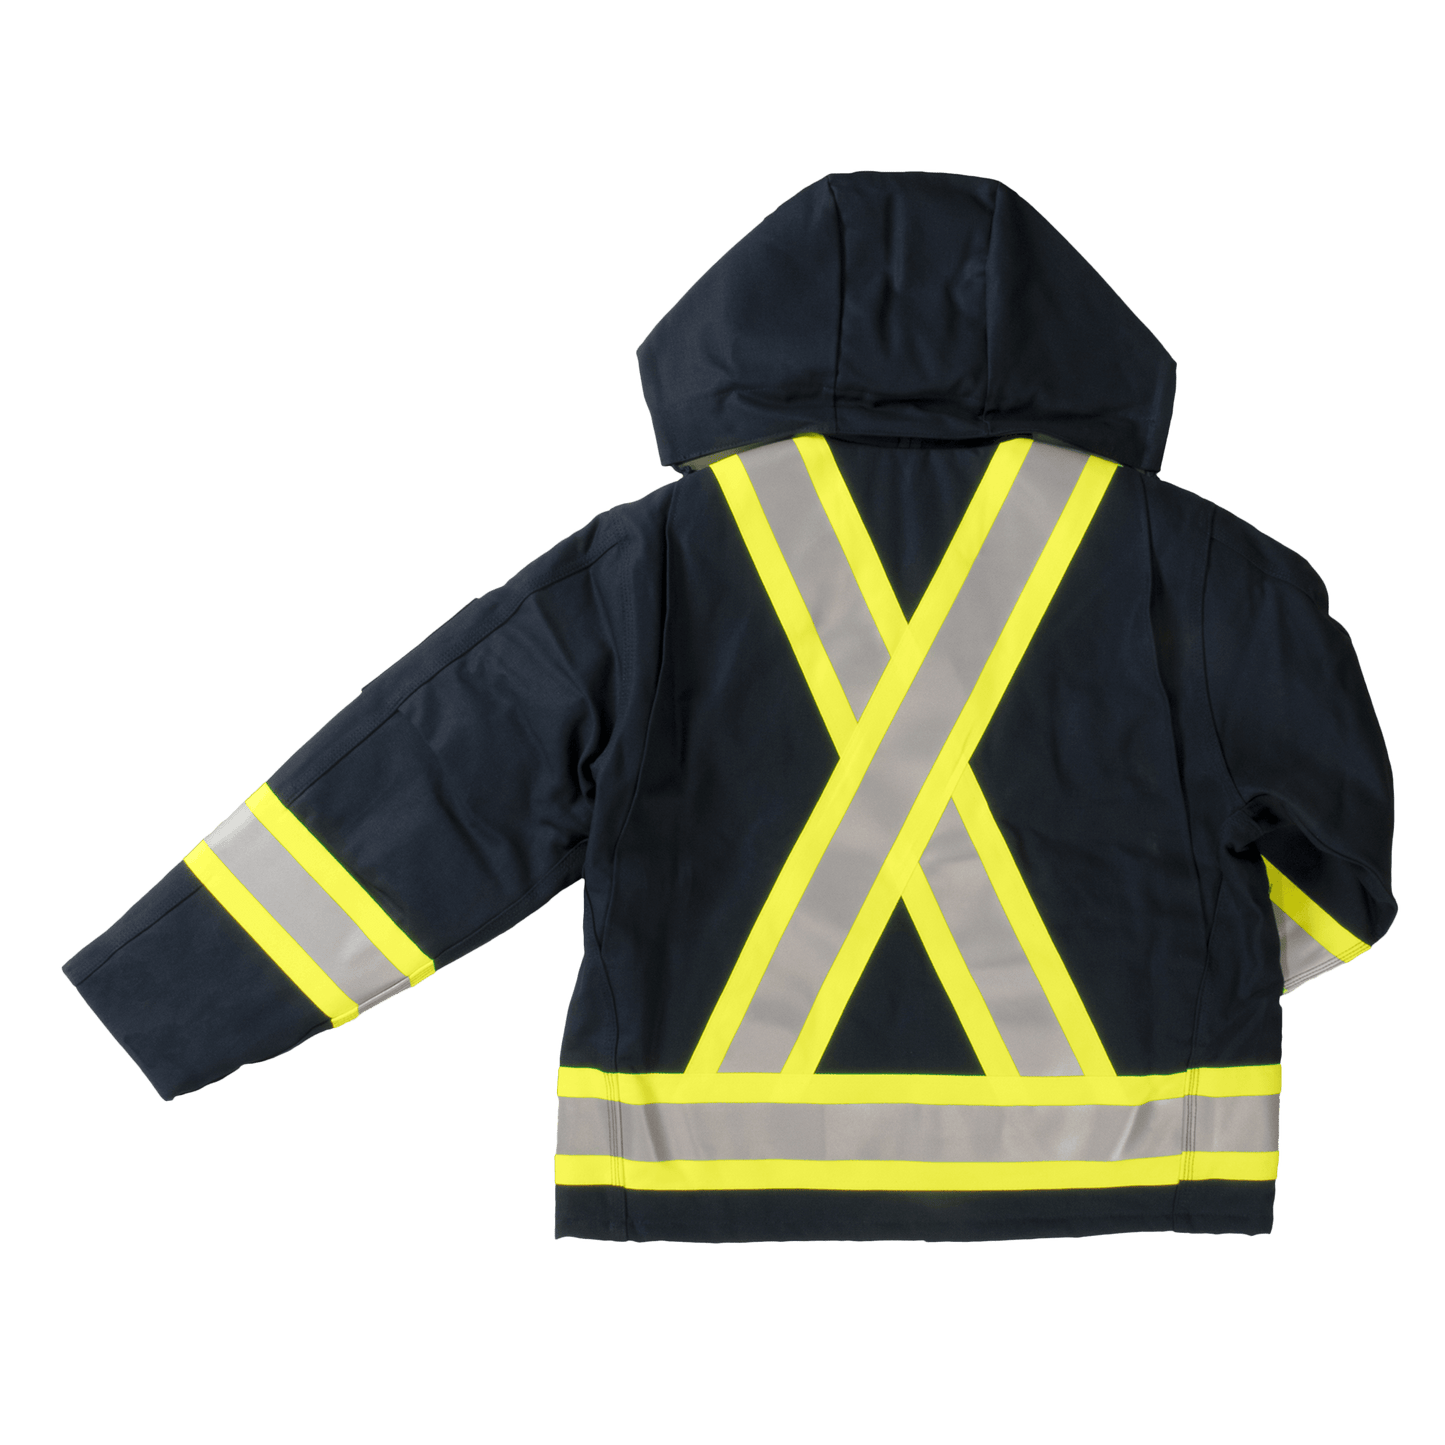 Tough Duck Duck Safety Jacket - S457 - Navy - back